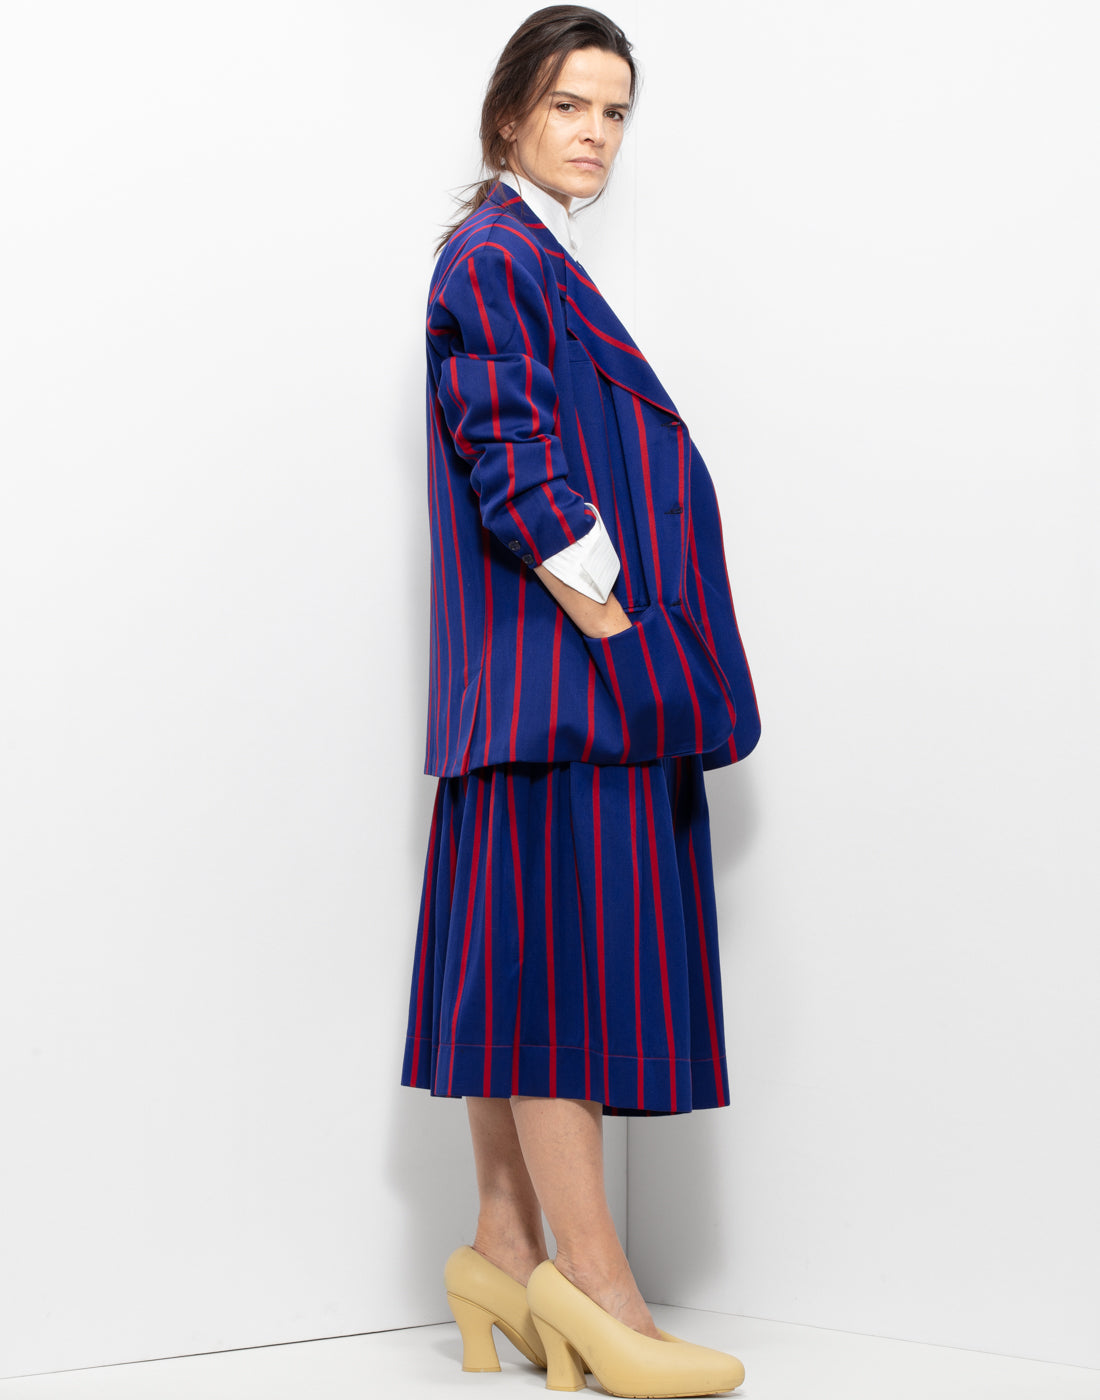 Funky Striped Skirt Suit